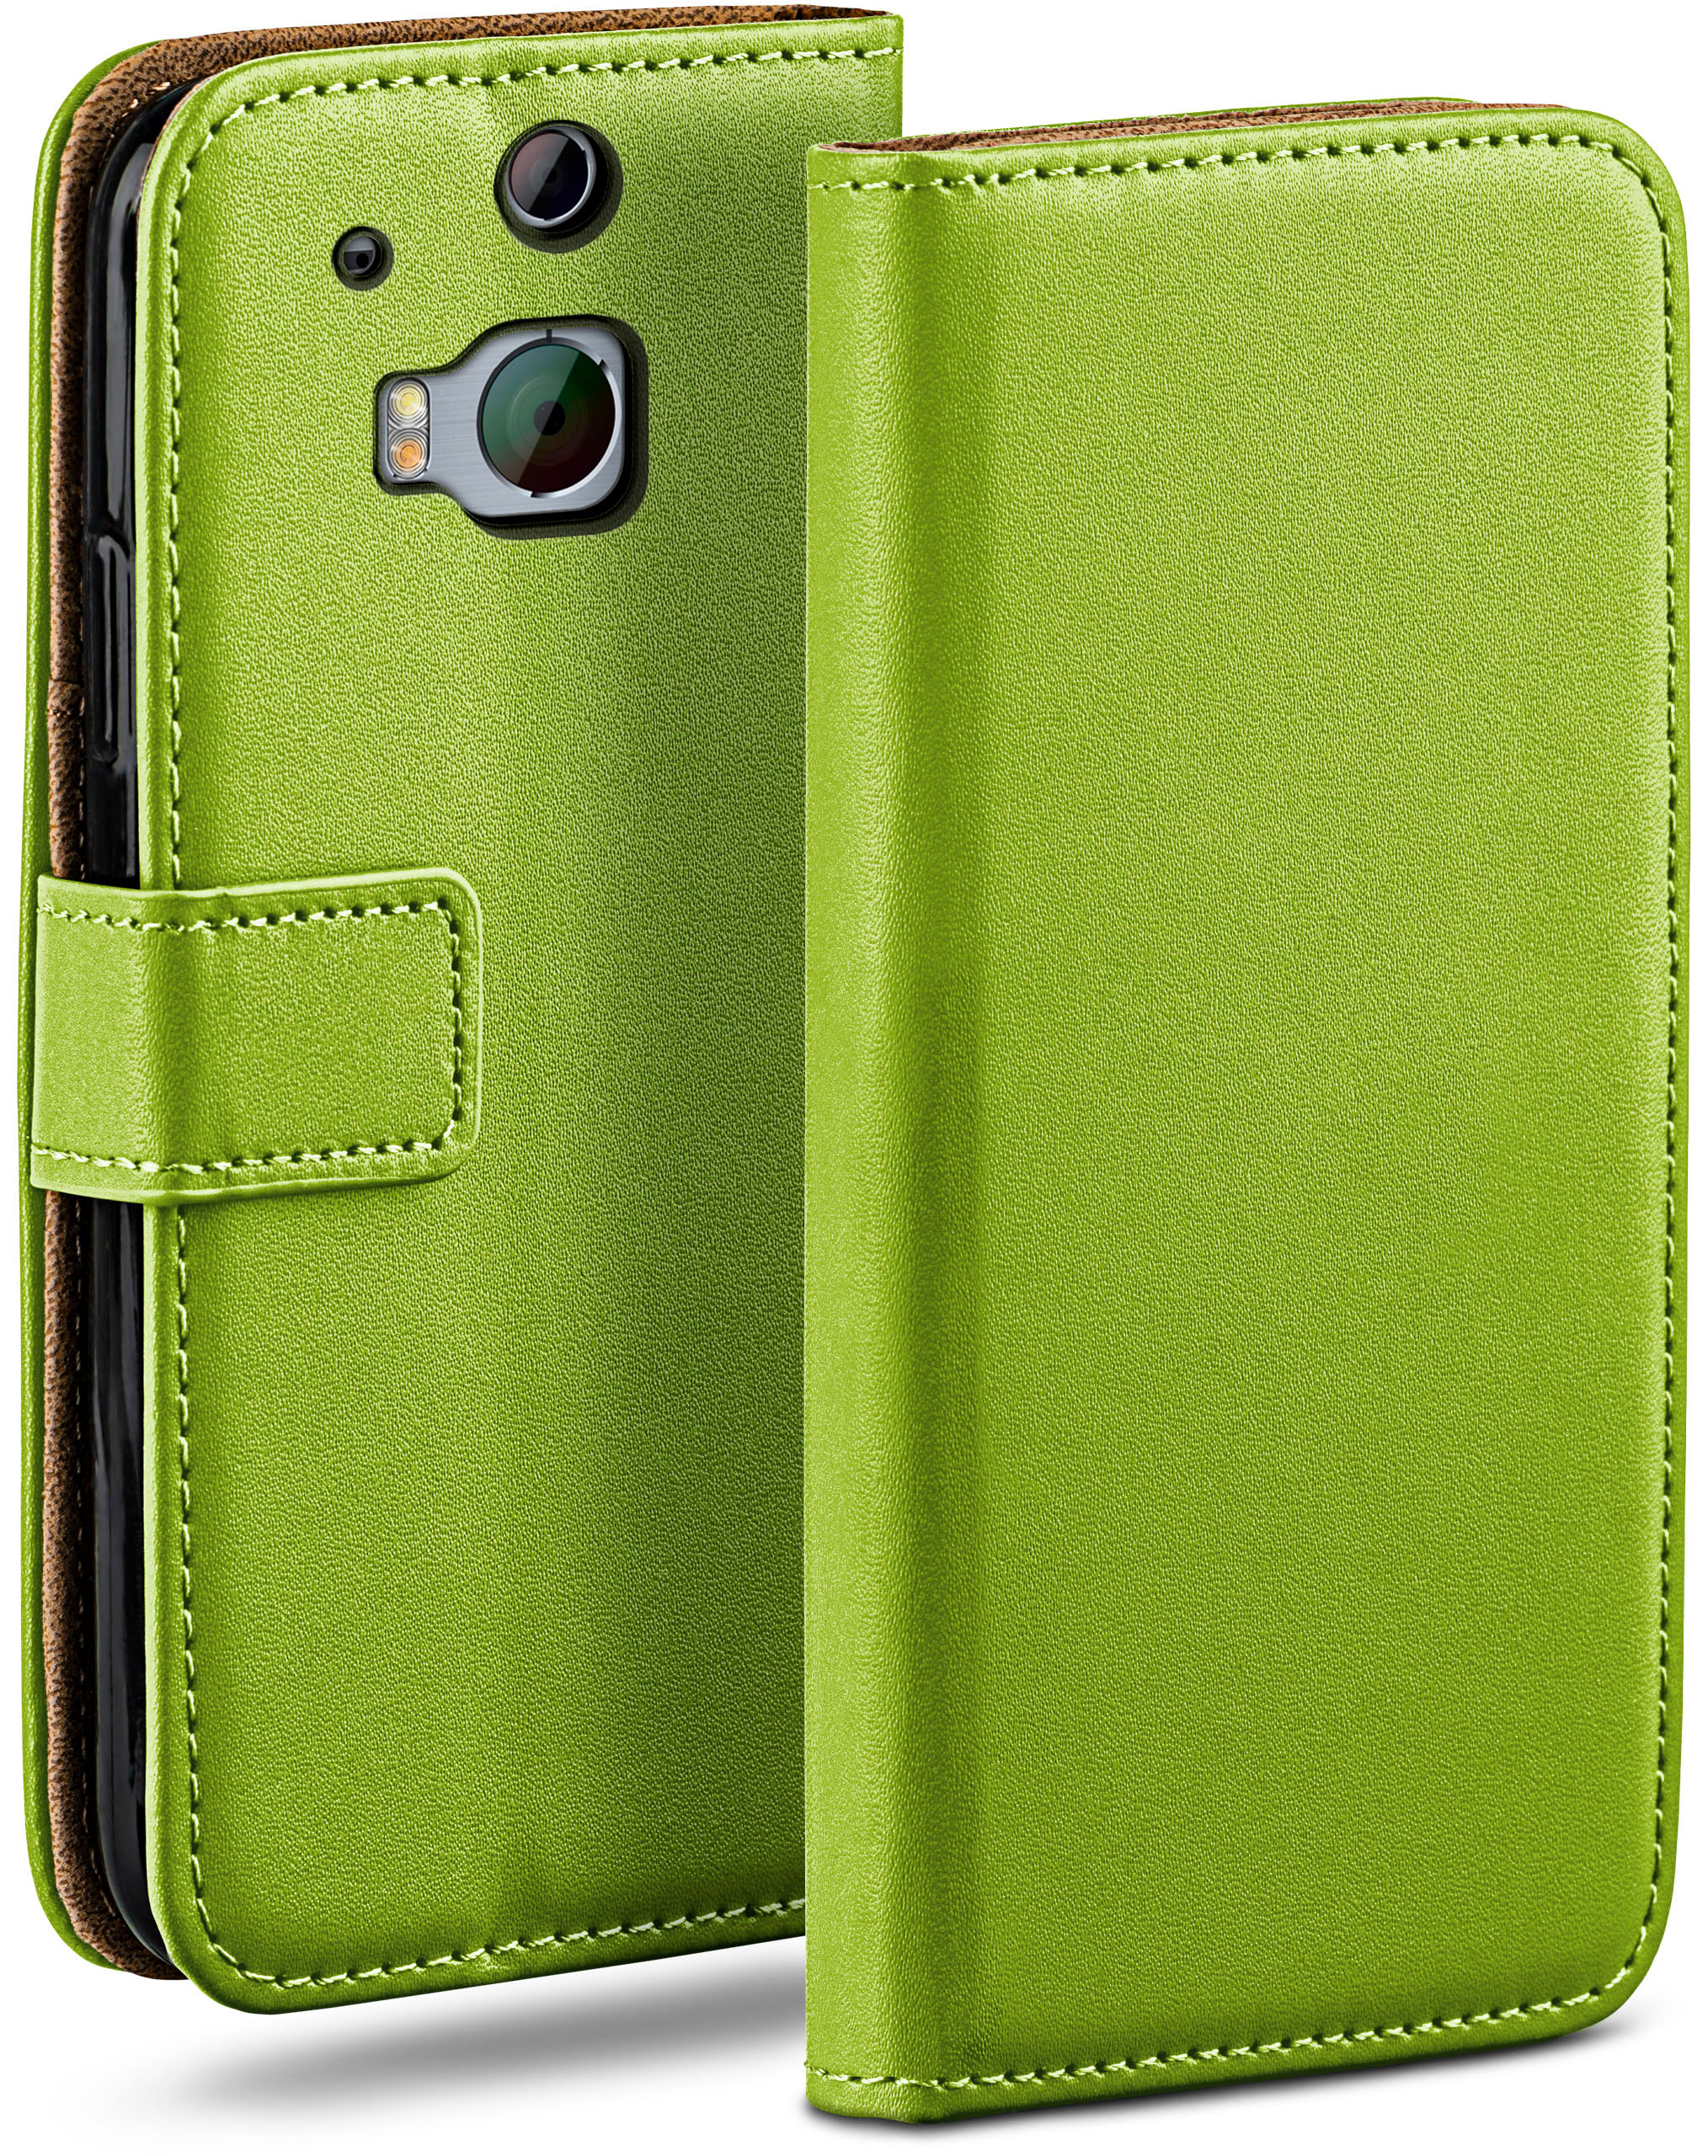 M8 Case, MOEX Bookcover, M8s, Lime-Green One Book / HTC,